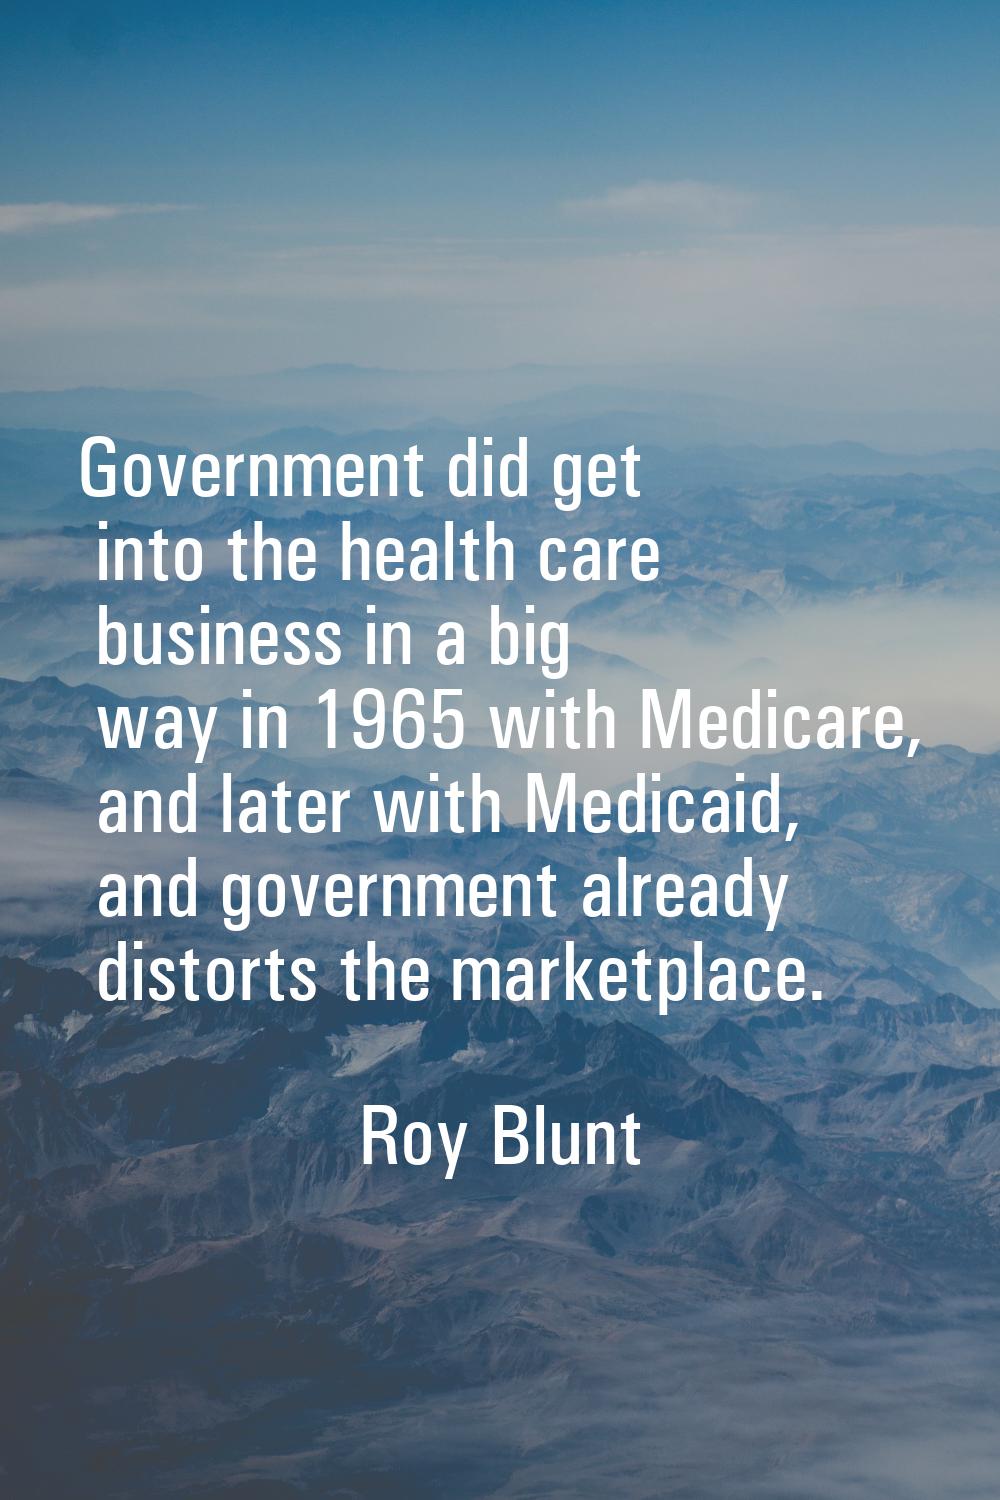 Government did get into the health care business in a big way in 1965 with Medicare, and later with